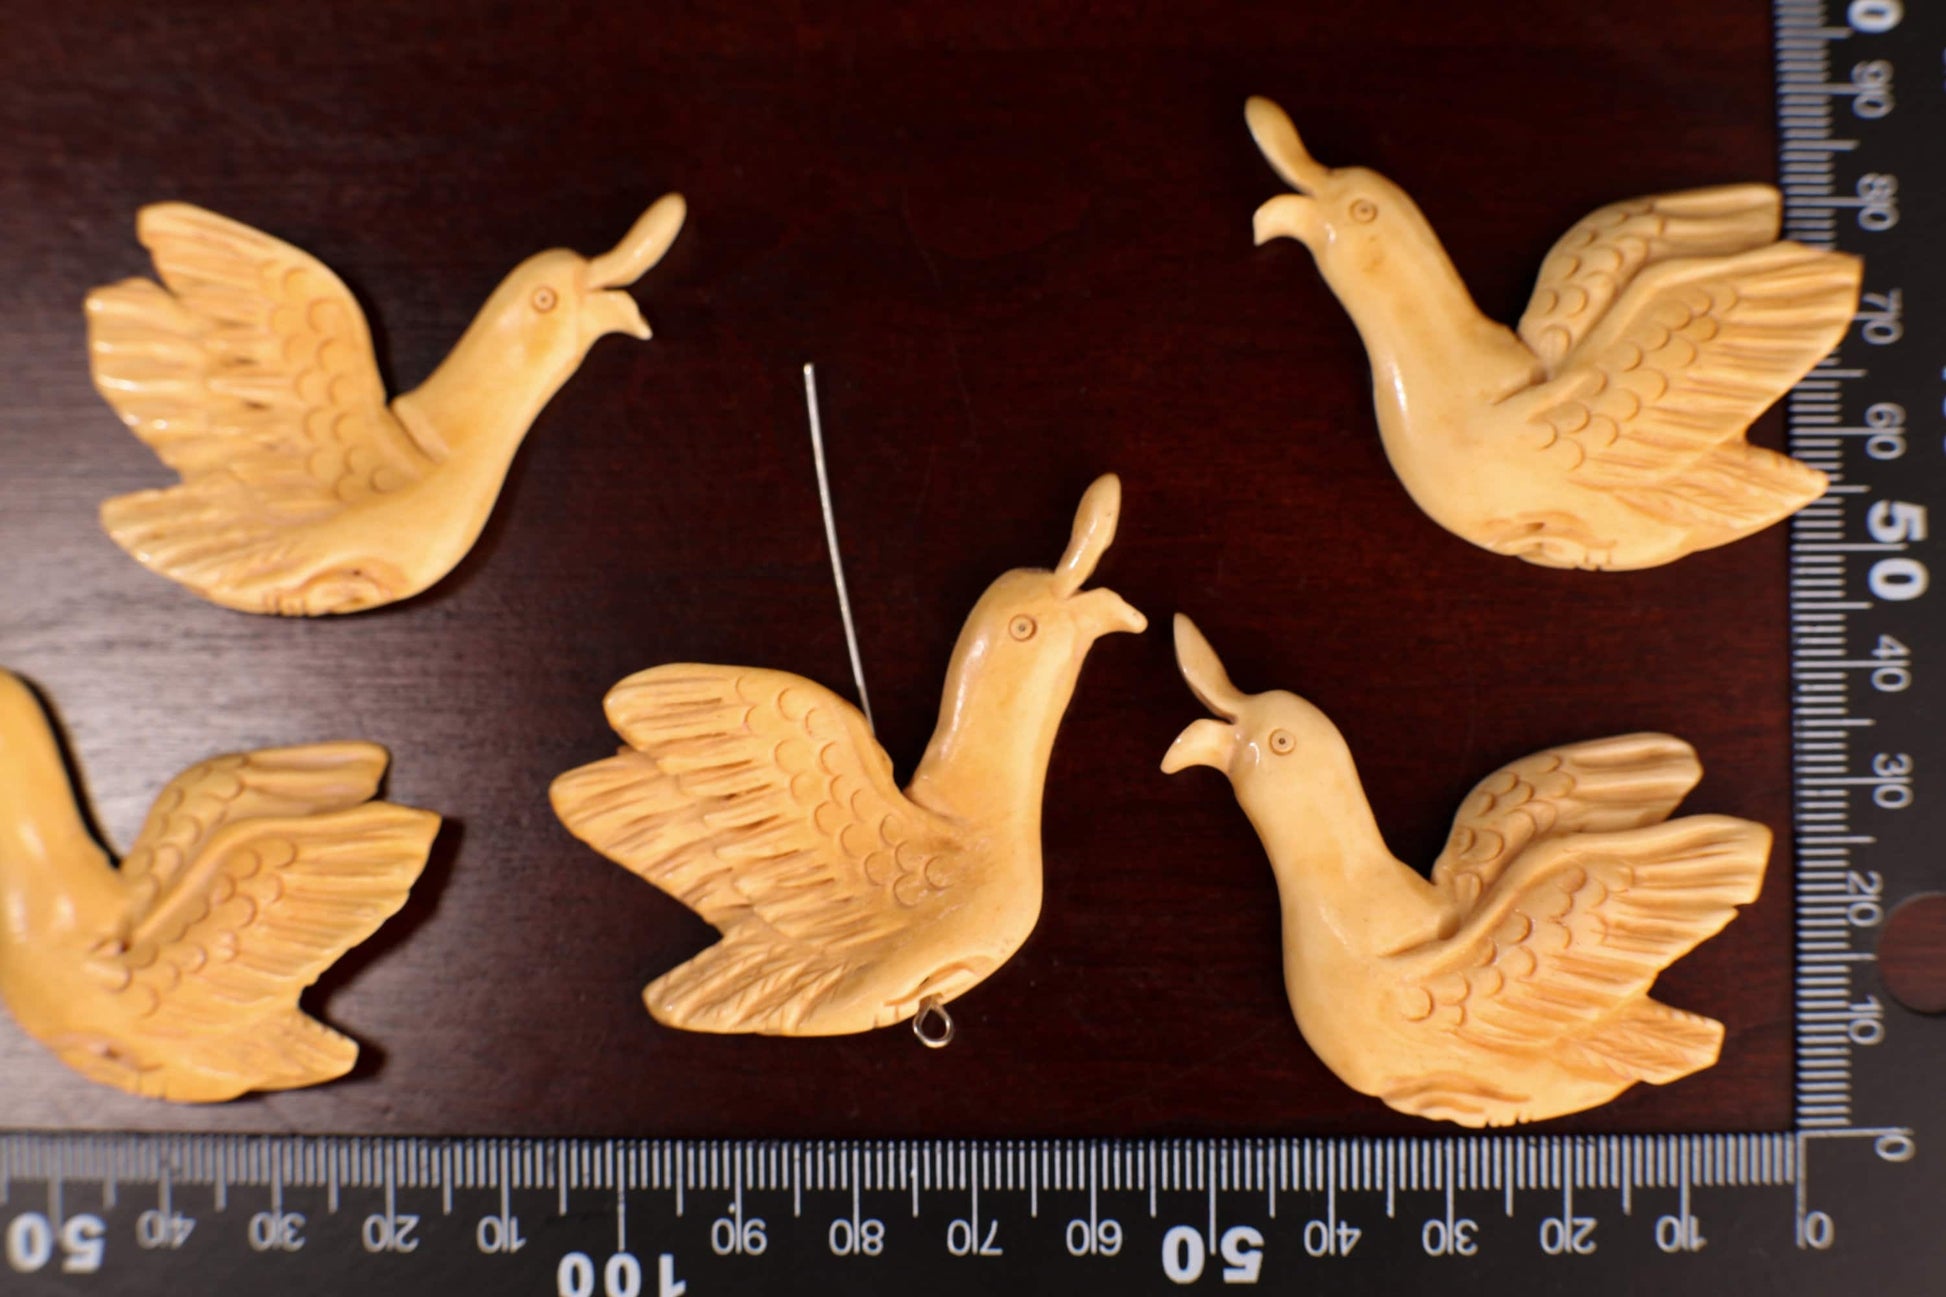 Carved Buffalo Bone Swan, 35x53mm Hand Crafted Double Sided Animal Figurine Drilled Bead, Art Deco, jewelry making, display piece. 1 pc